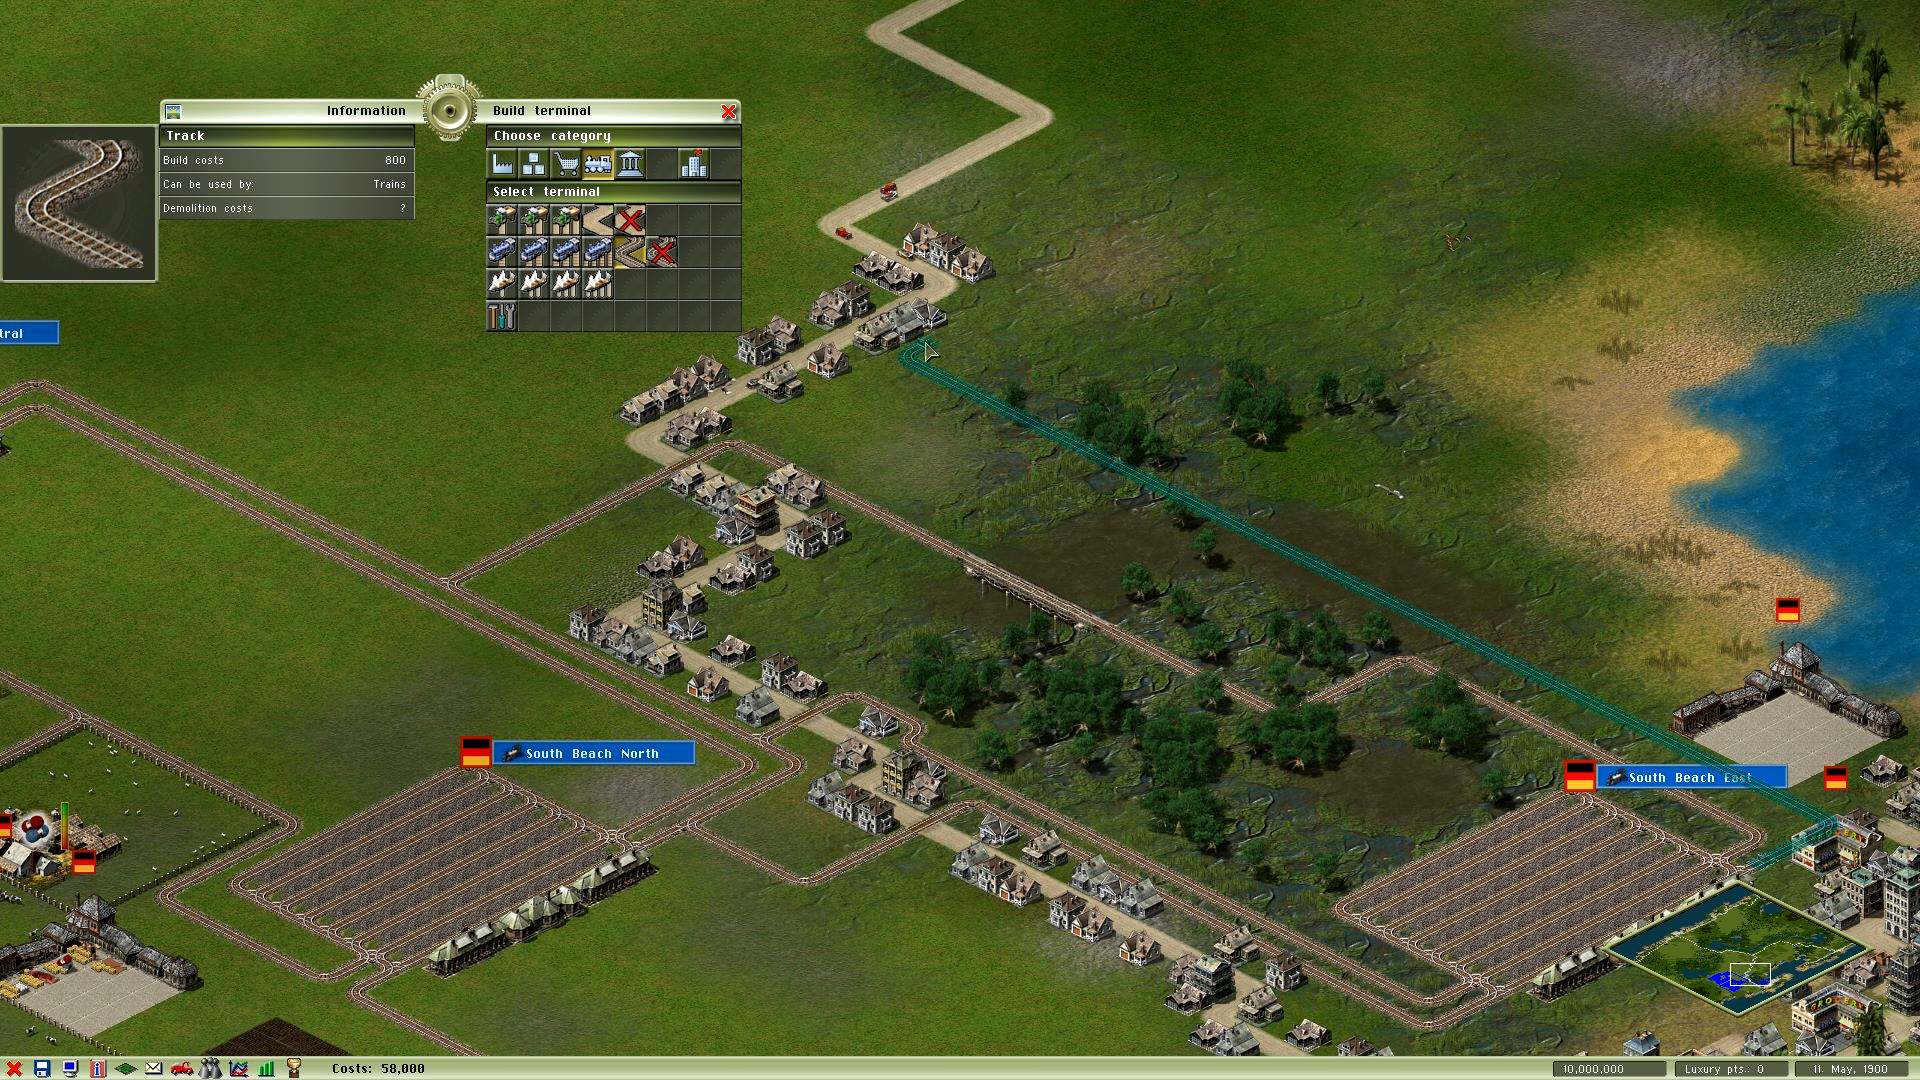 empire earth 2 multiplayer hack